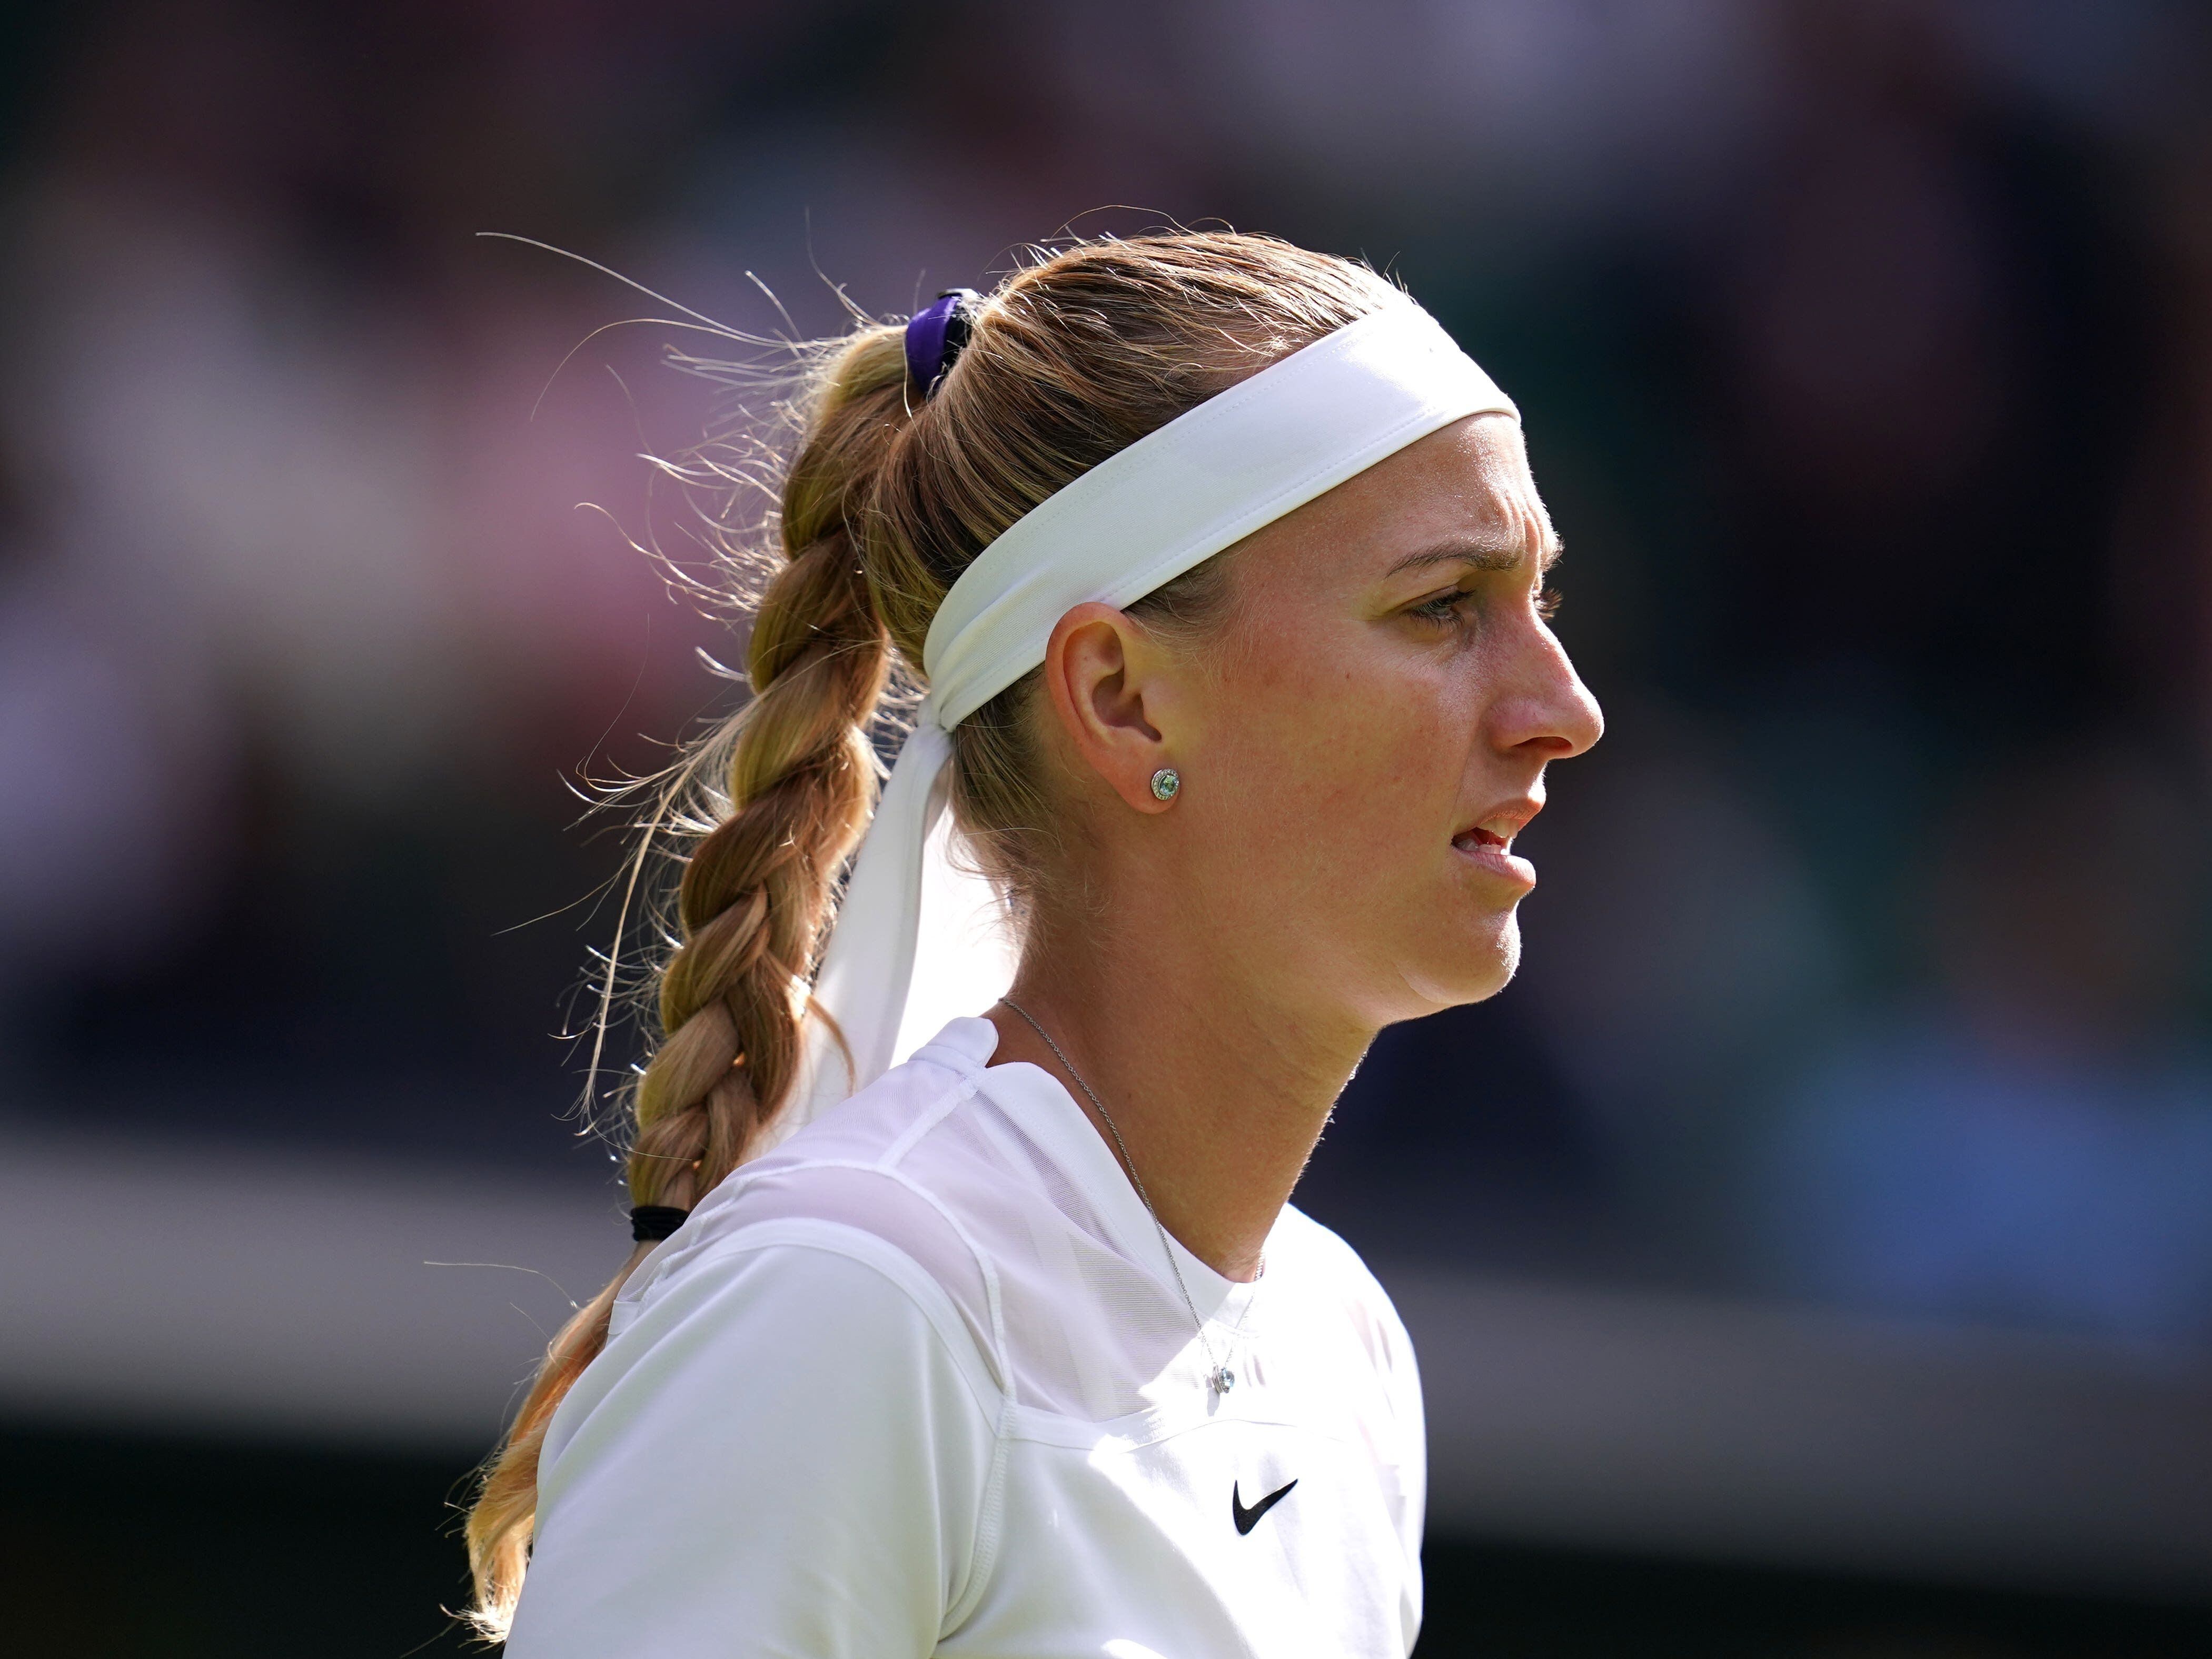 On this day in 2016: Petra Kvitova ‘fortunate to be alive’ after knife attack